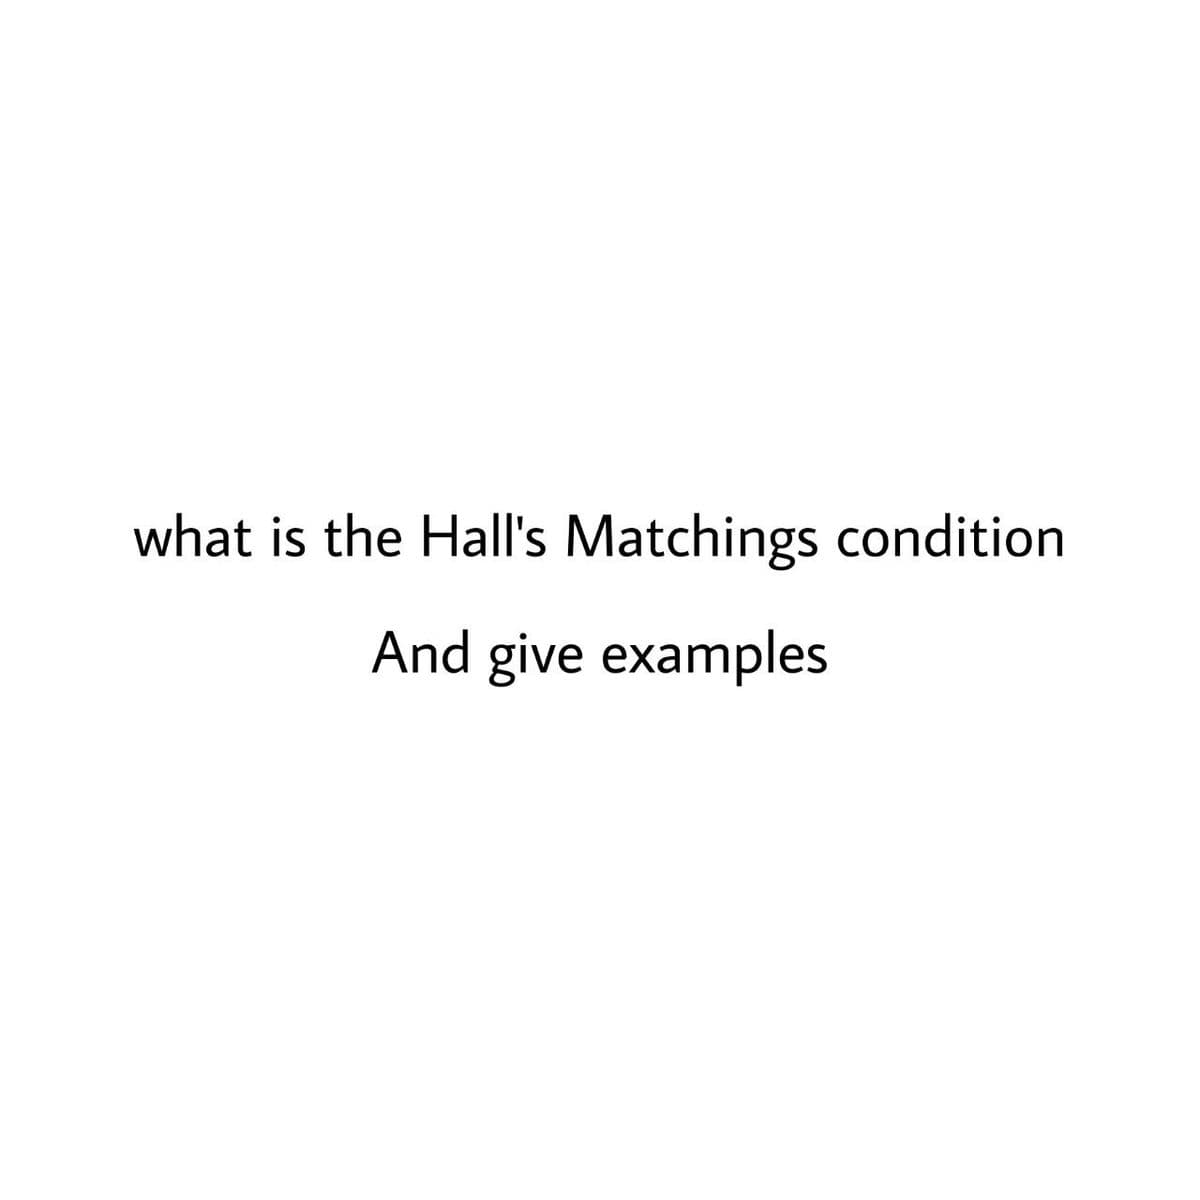 what is the Hall's Matchings condition
And give examples
